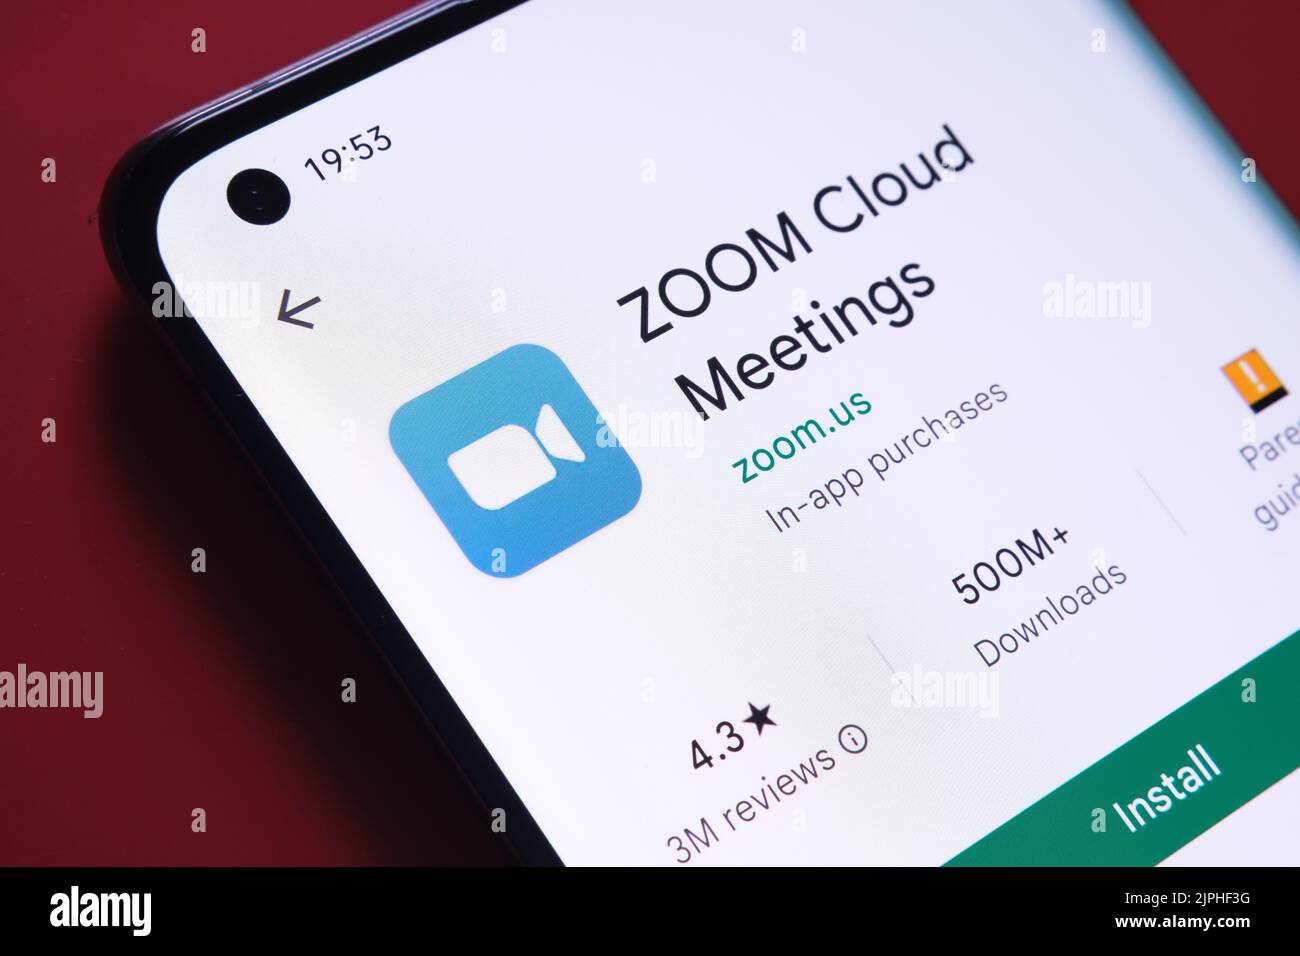 Zoom cloud meetings app seen in Google Play Store on the smartphone screen placed on red background. Close up photo with selective focus. Stafford, Un Stock Photo